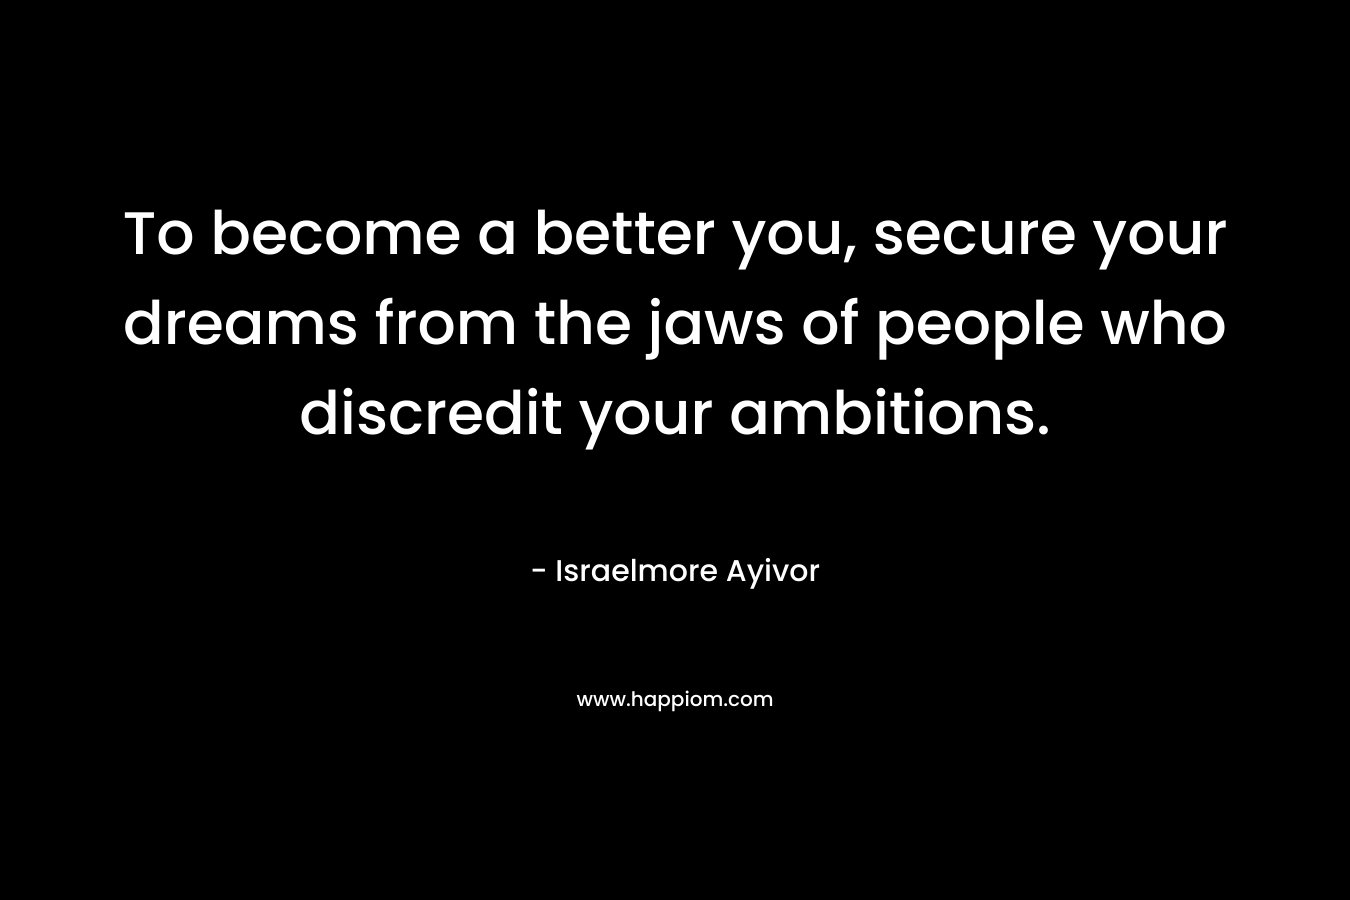 To become a better you, secure your dreams from the jaws of people who discredit your ambitions.